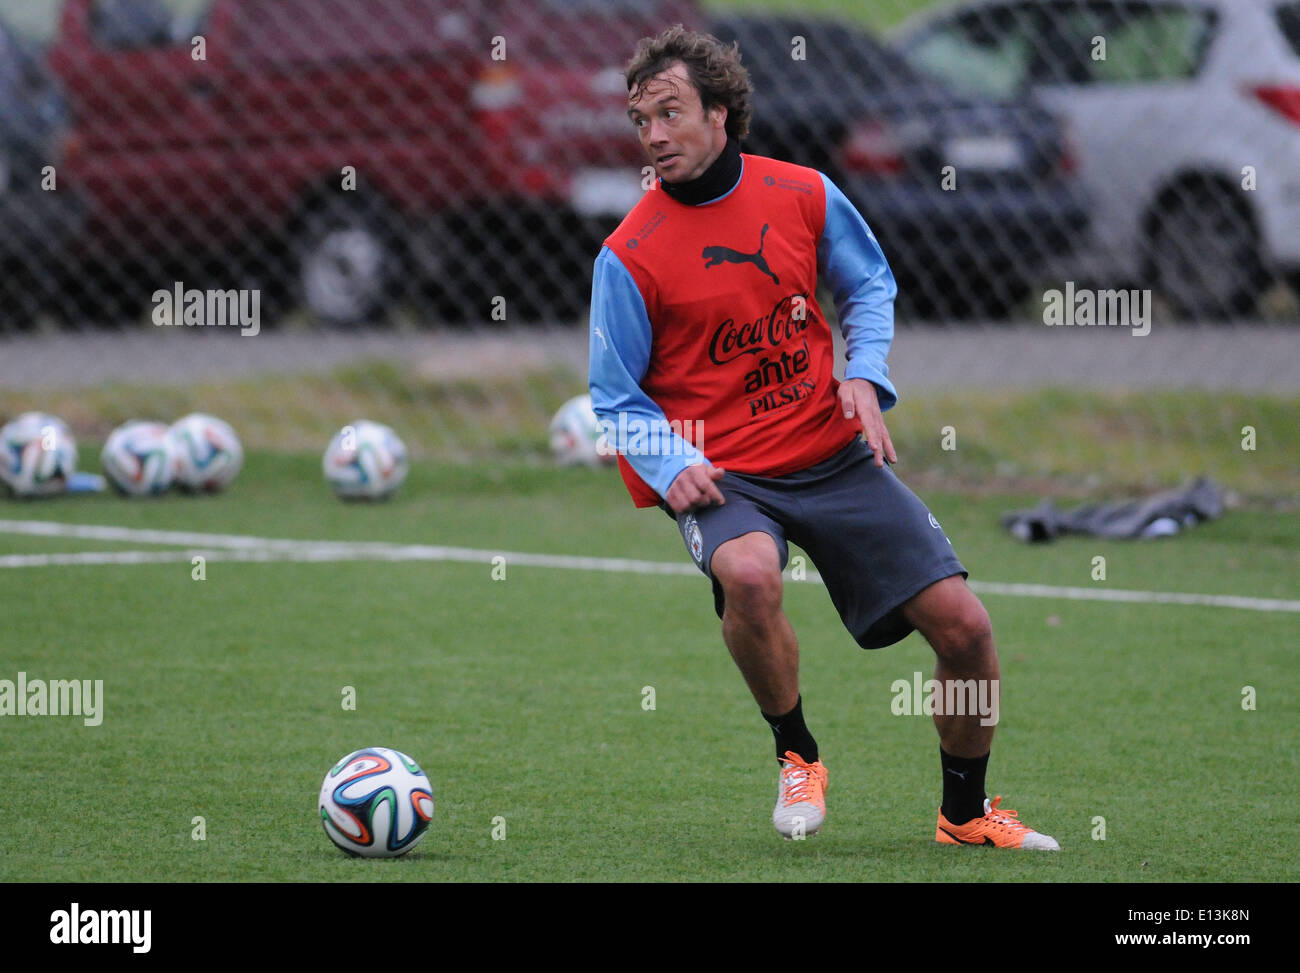 Montevideo, Uruguay. 21st May, 2014. Uruguay's national team player Diego Lugano takes part during a training session before the FIFA World Cup, at Uruguay Celeste complex, in Montevideo, capital of Uruguay, on May 21, 2014. © Nicolas Celaya/Xinhua/Alamy Live News Stock Photo